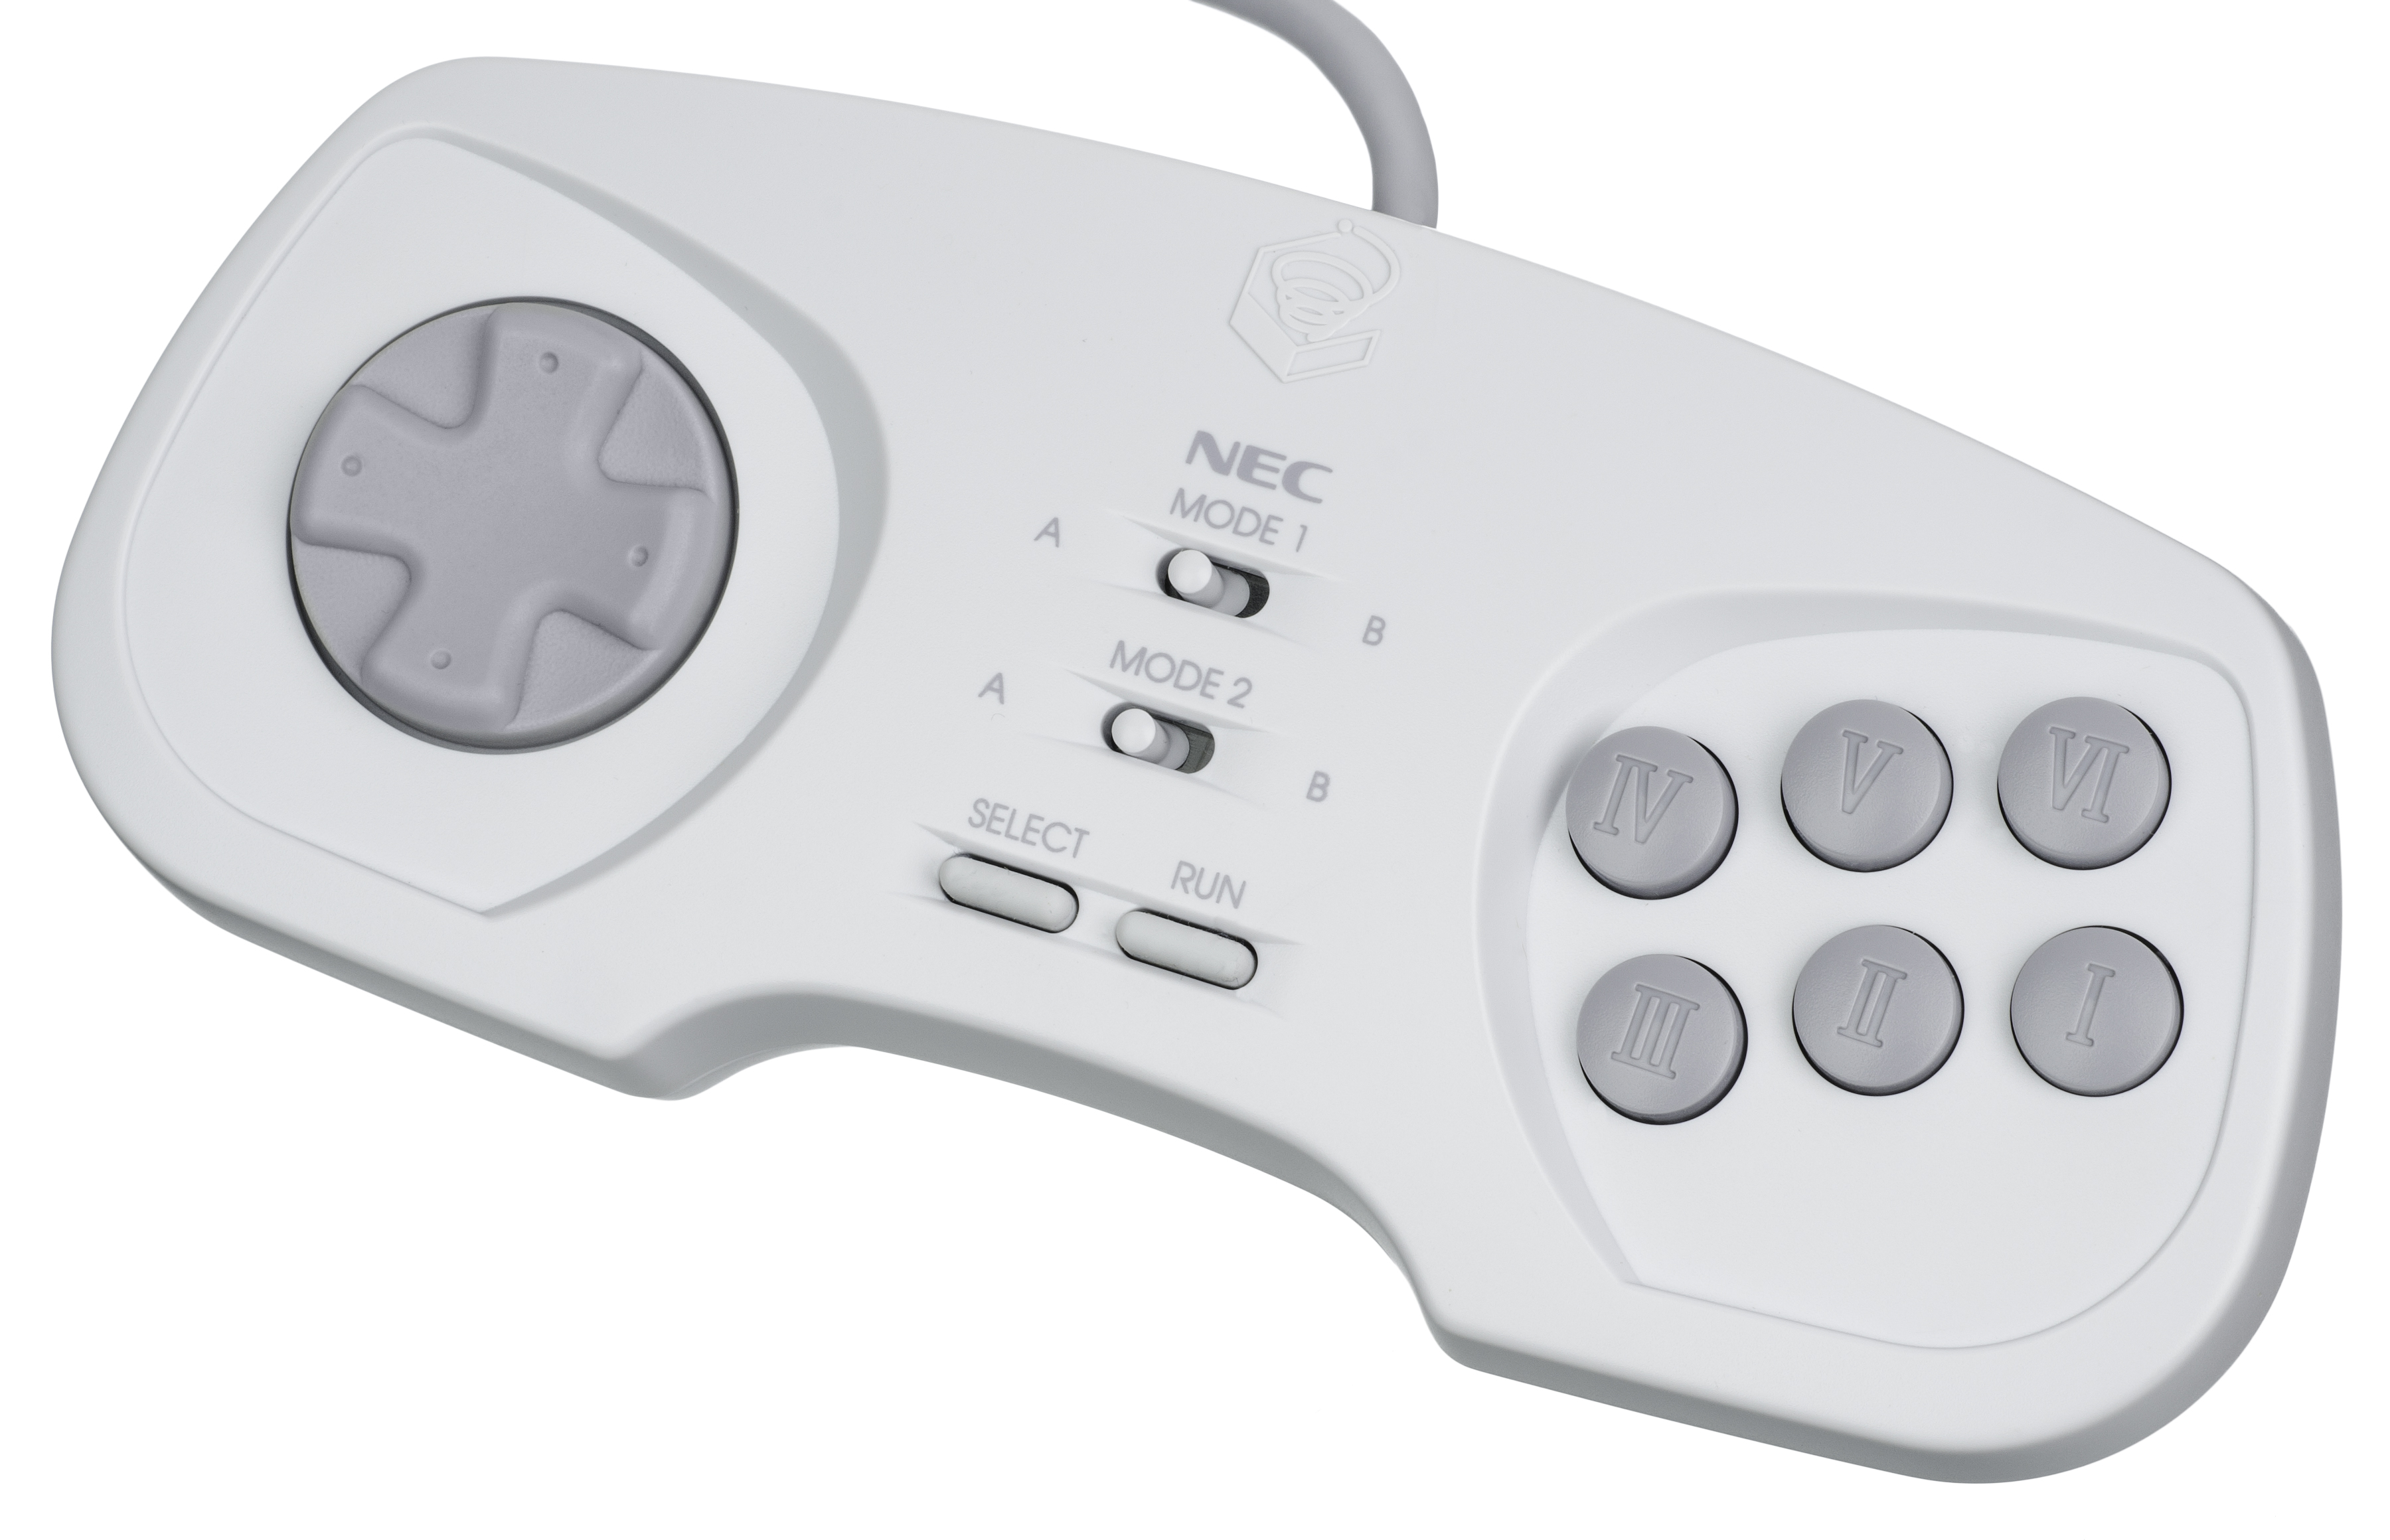 File:PC-FX-Controller.jpg - Wikimedia Commons